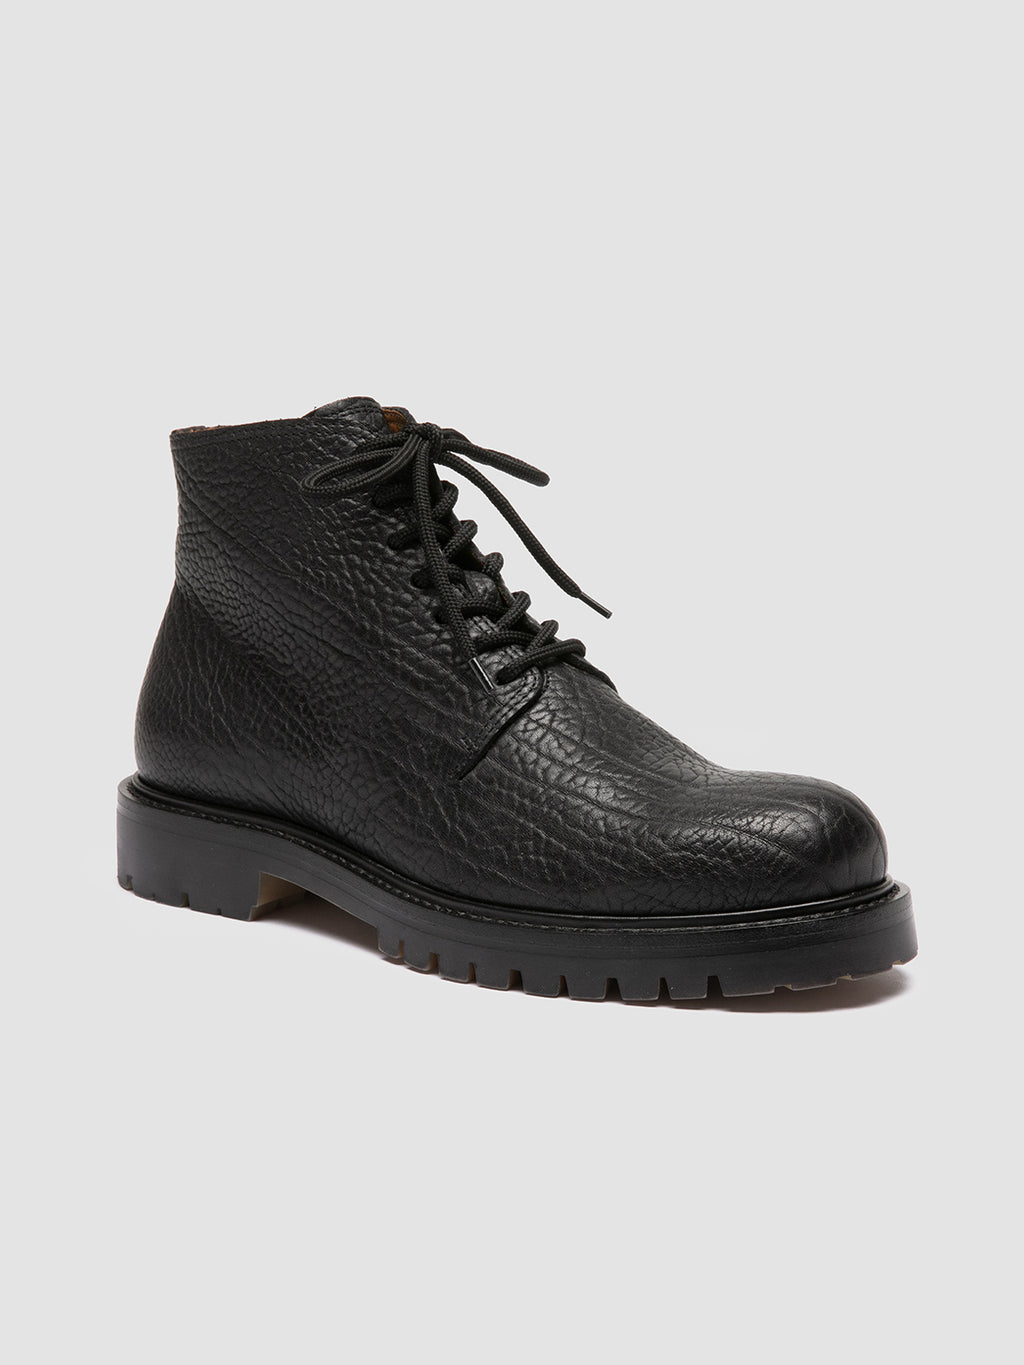 BOSS 011 - Black Leather Lace-up Boots Men Officine Creative - 3